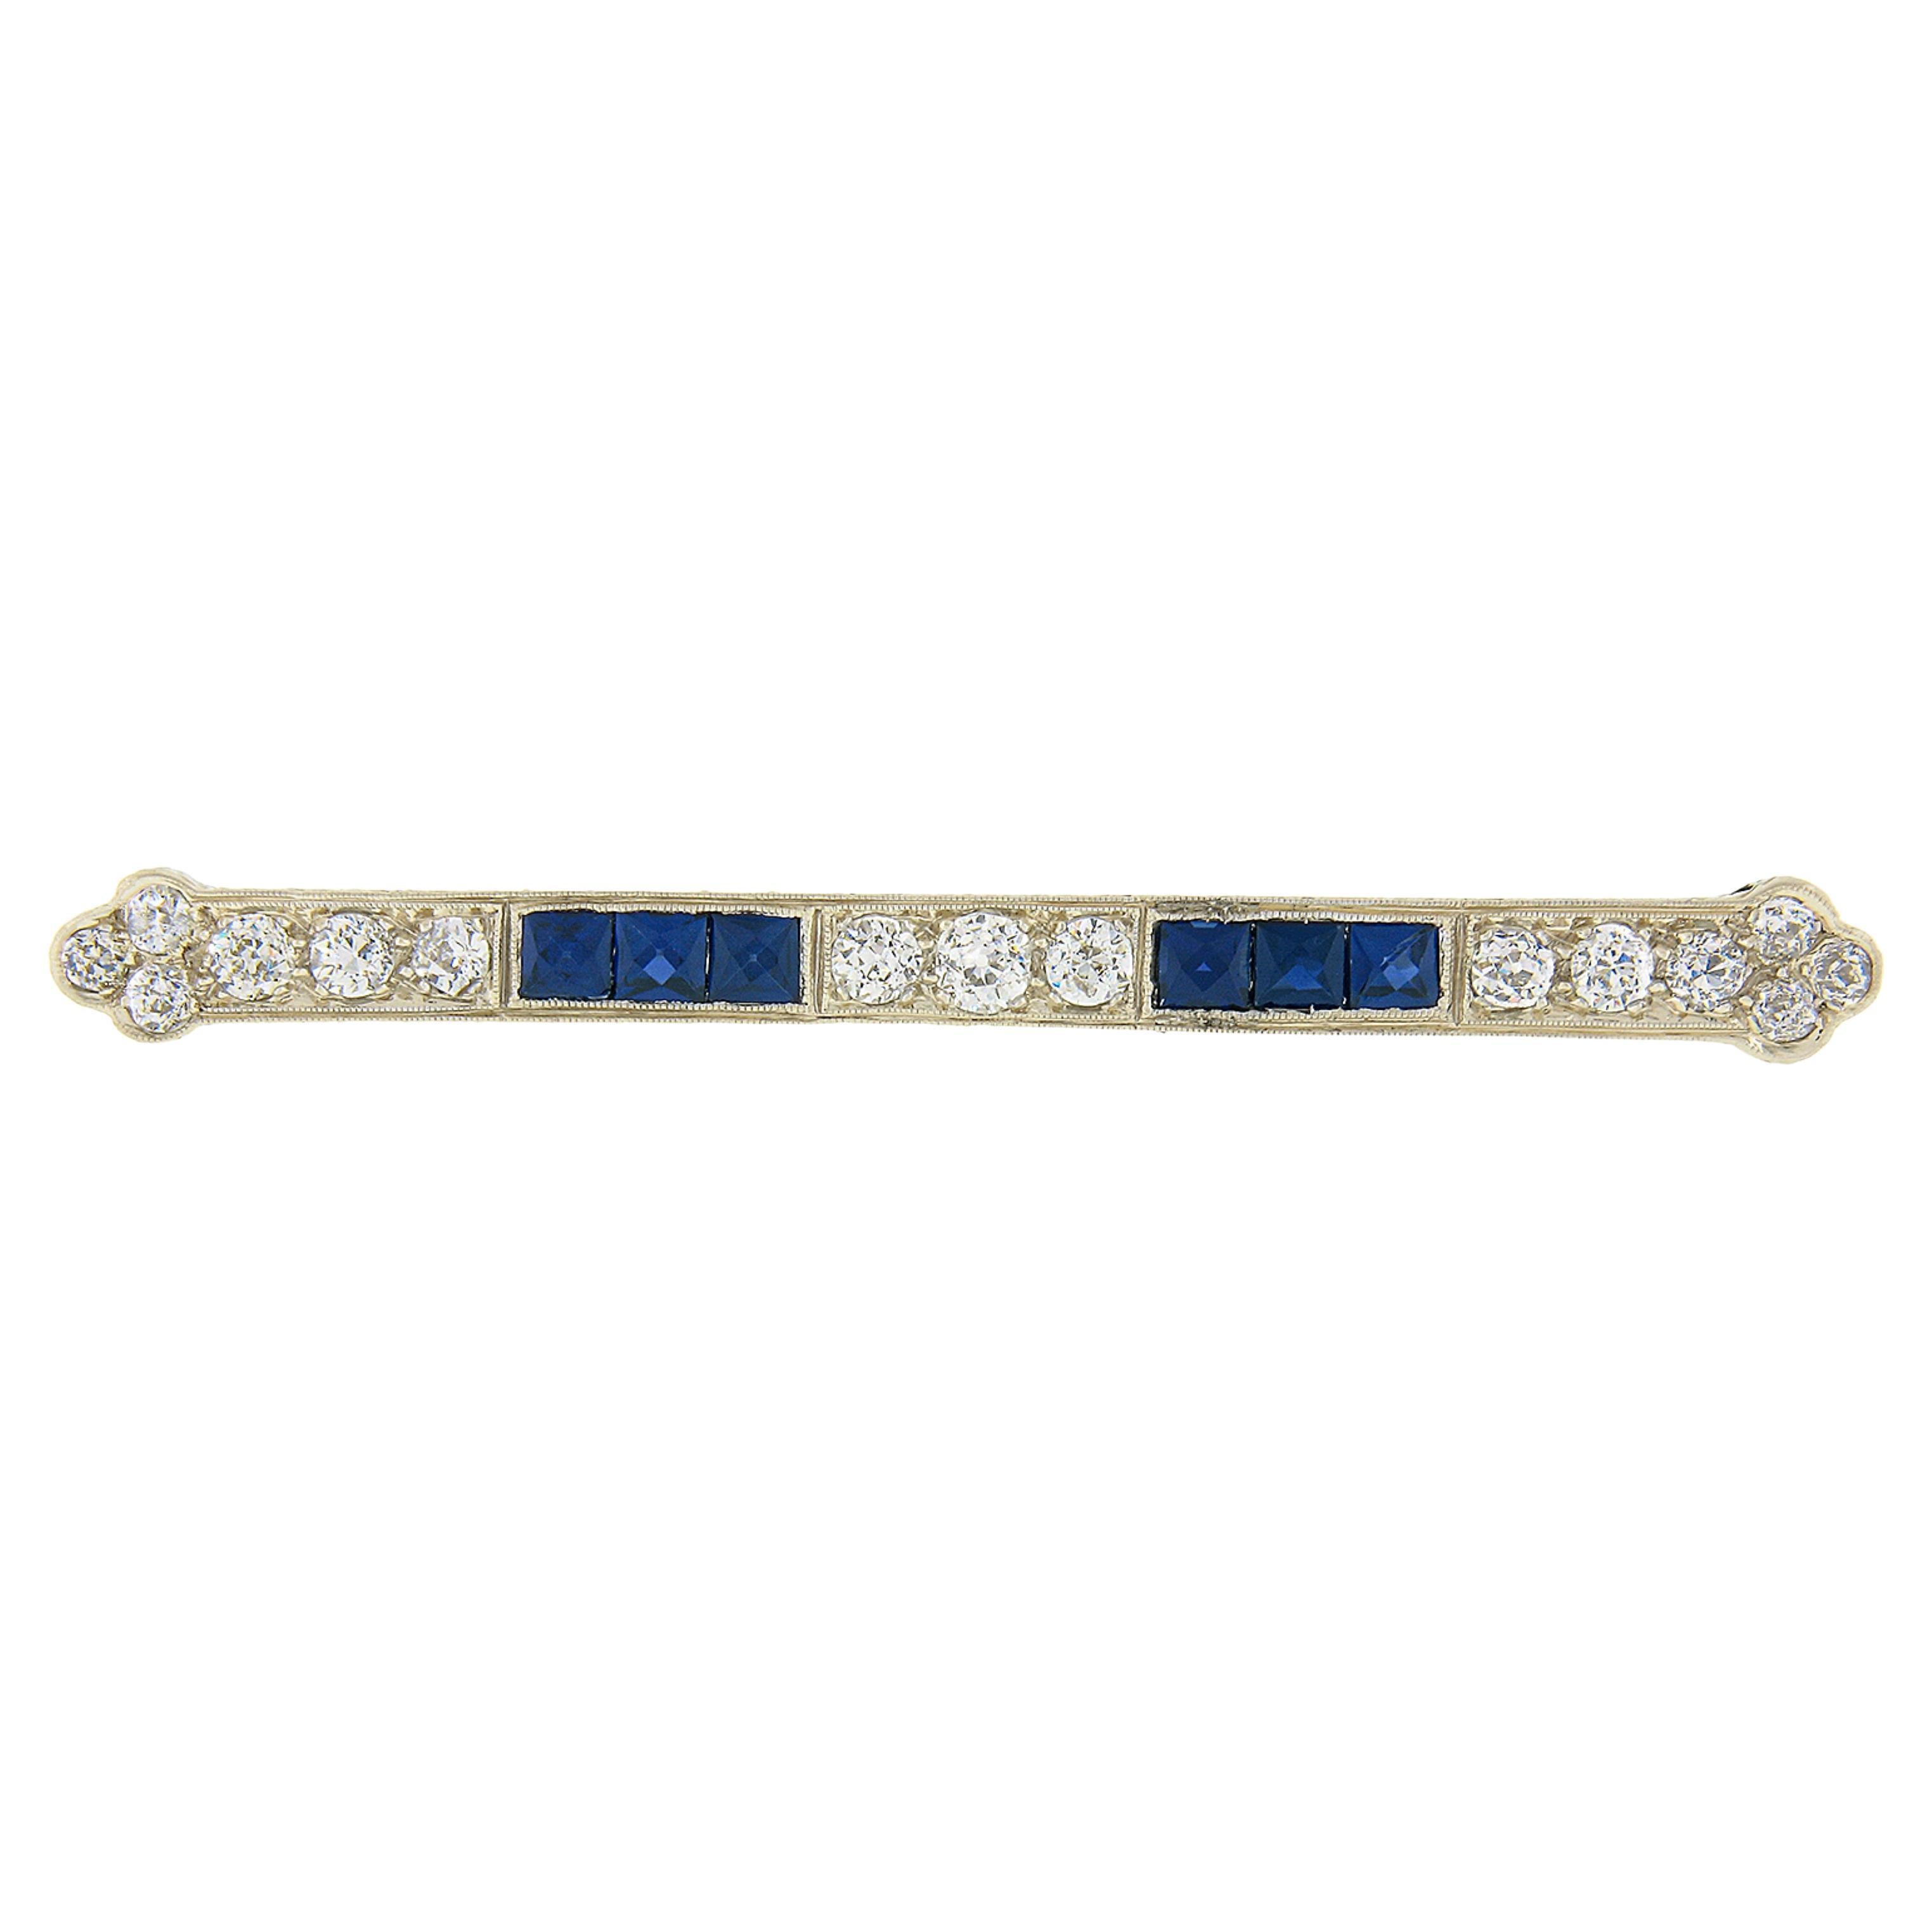 Antique Art Deco 14k White Gold GIA Lab Sapphire and Nat Diamond Bar Pin Brooch